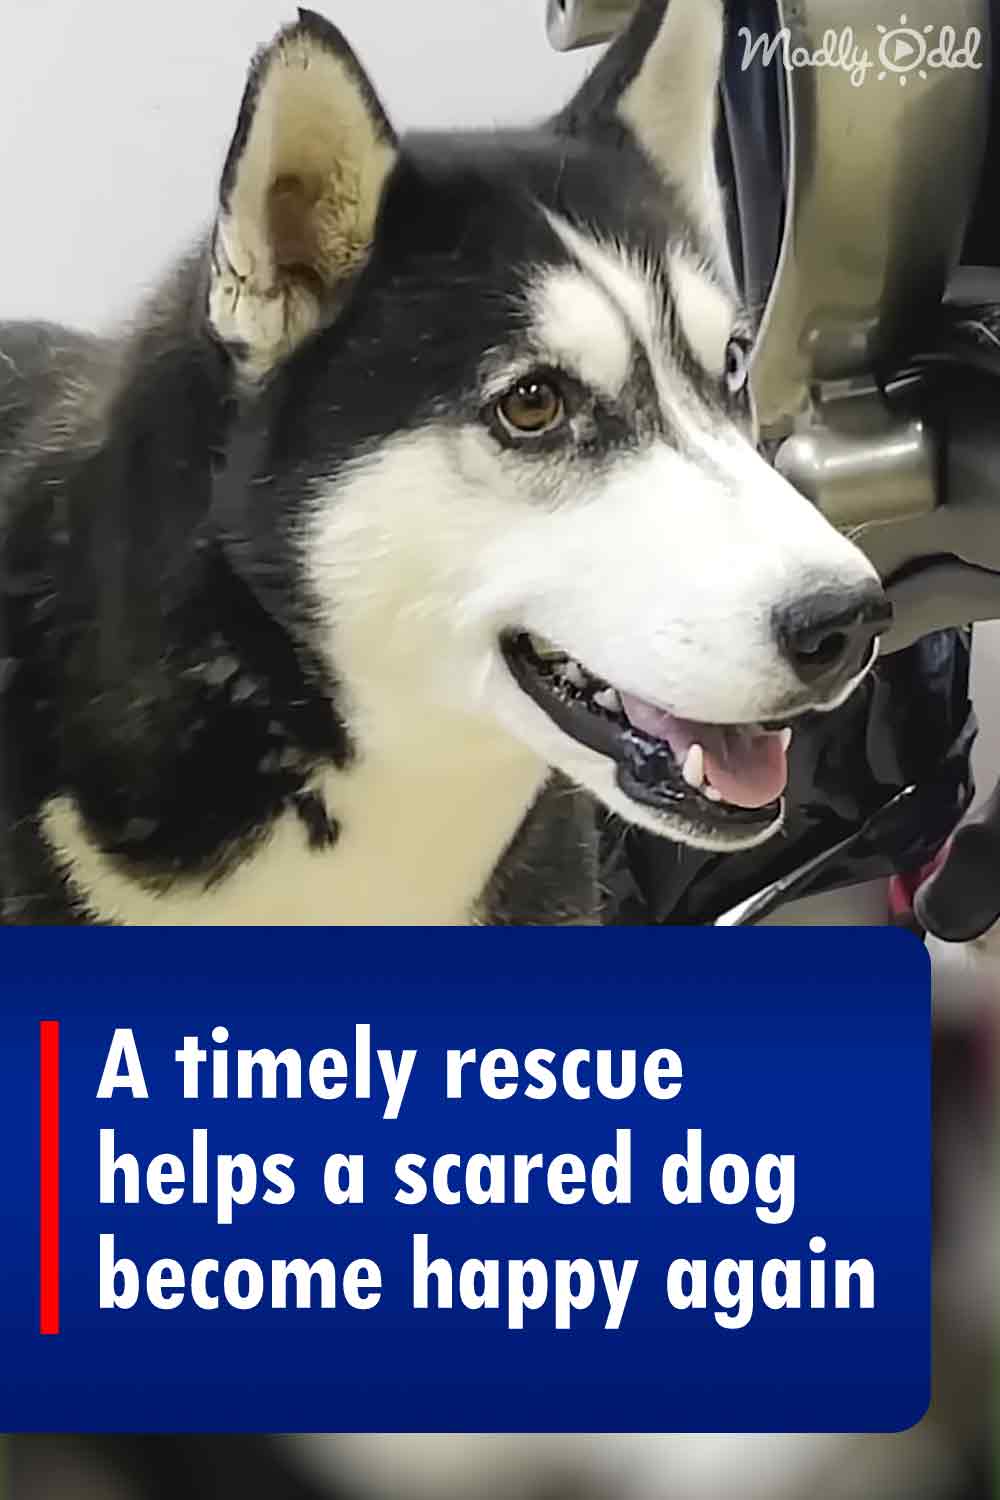 A timely rescue helps a scared dog become happy again